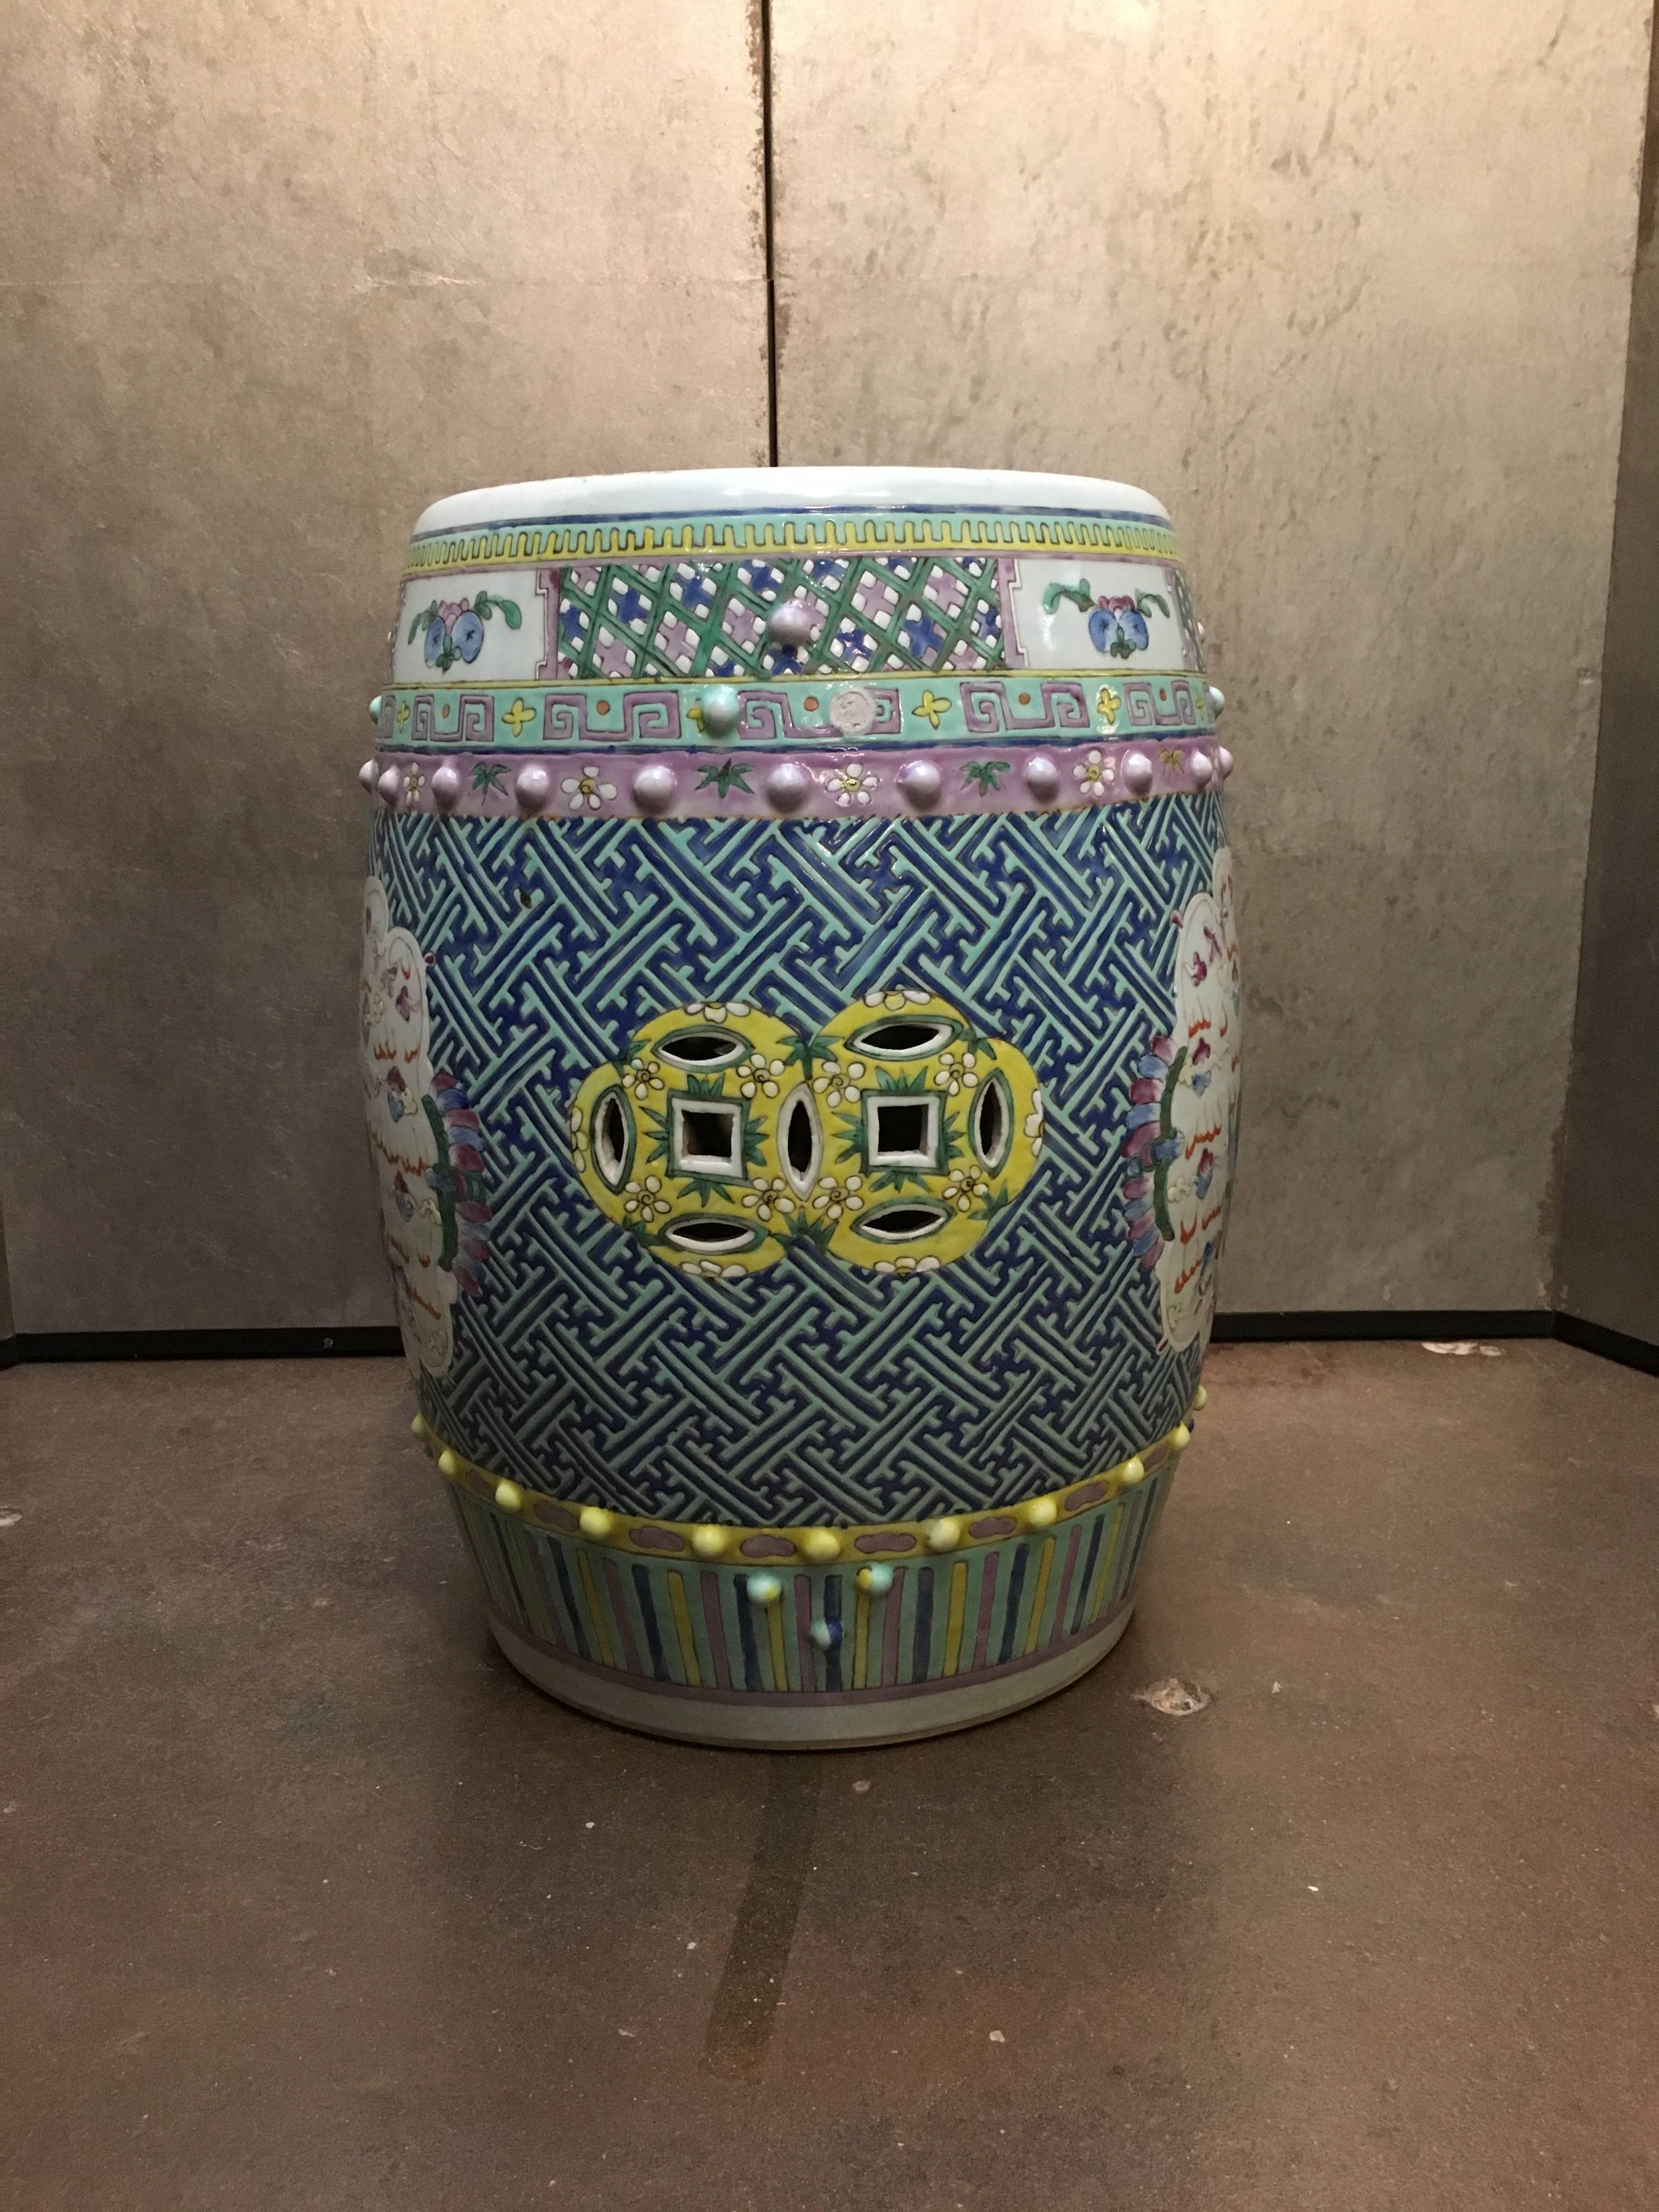 A beautiful Chinese famille rose enameled porcelain garden stool, Qing dynasty, mid-19th century. Of traditional drum shape, and painted with stunning raised enamels in blue, yellow, green, pink and purple.

The body decorated with raised enamels